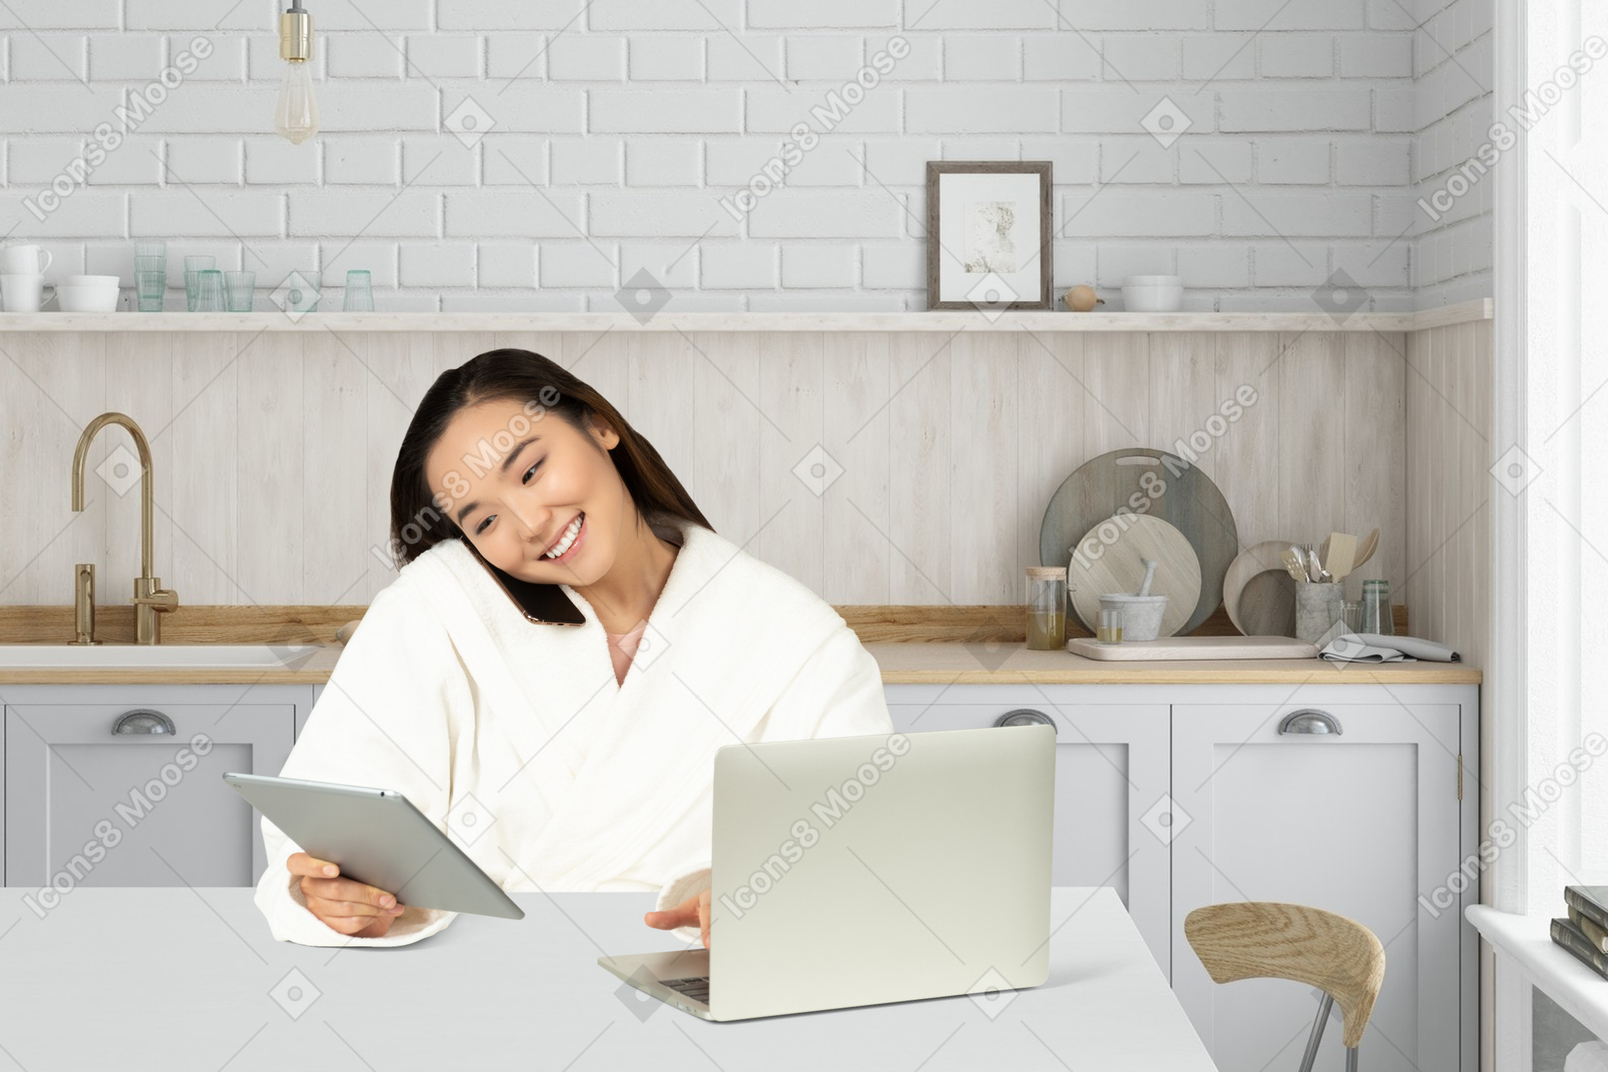 Woman in bathrobe sitting at a table using tablet and laptop